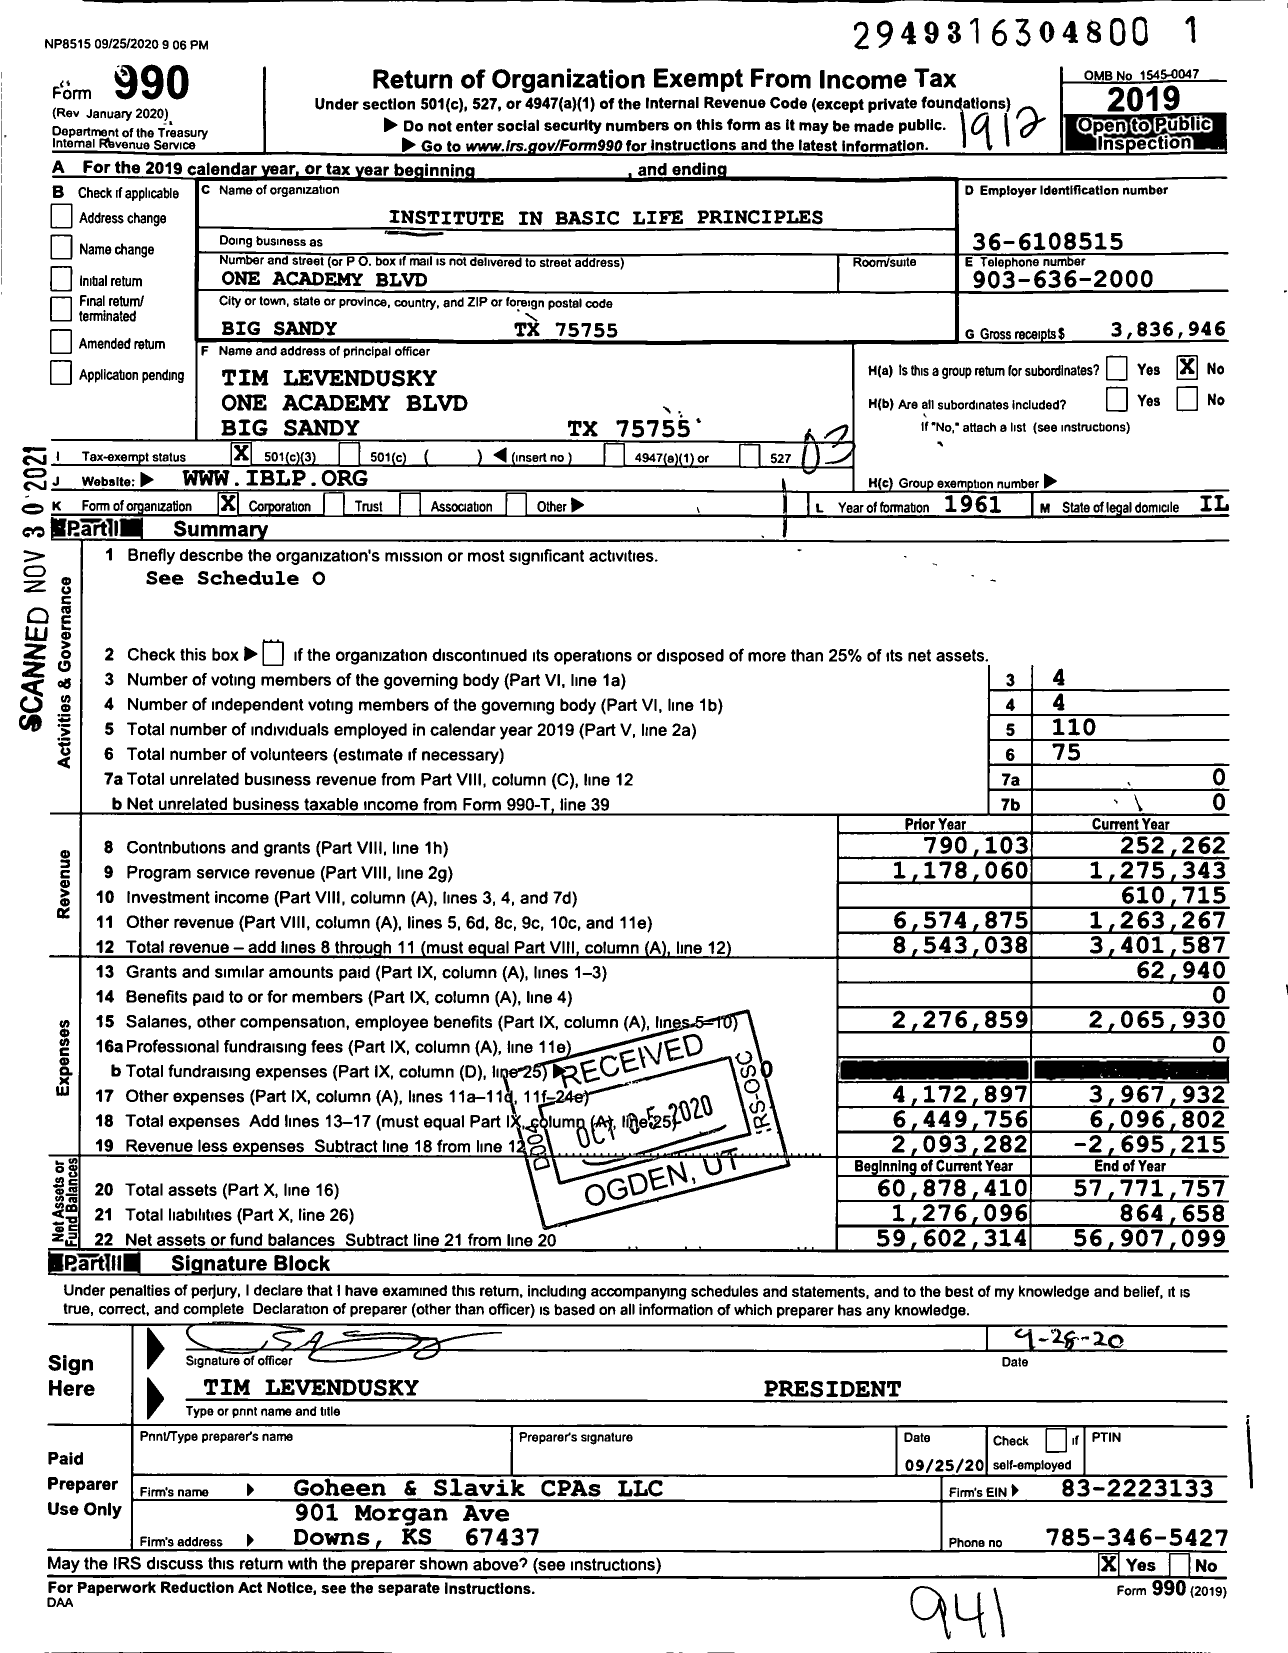 Image of first page of 2019 Form 990 for Institute in Basic Life Principles (IBLP)